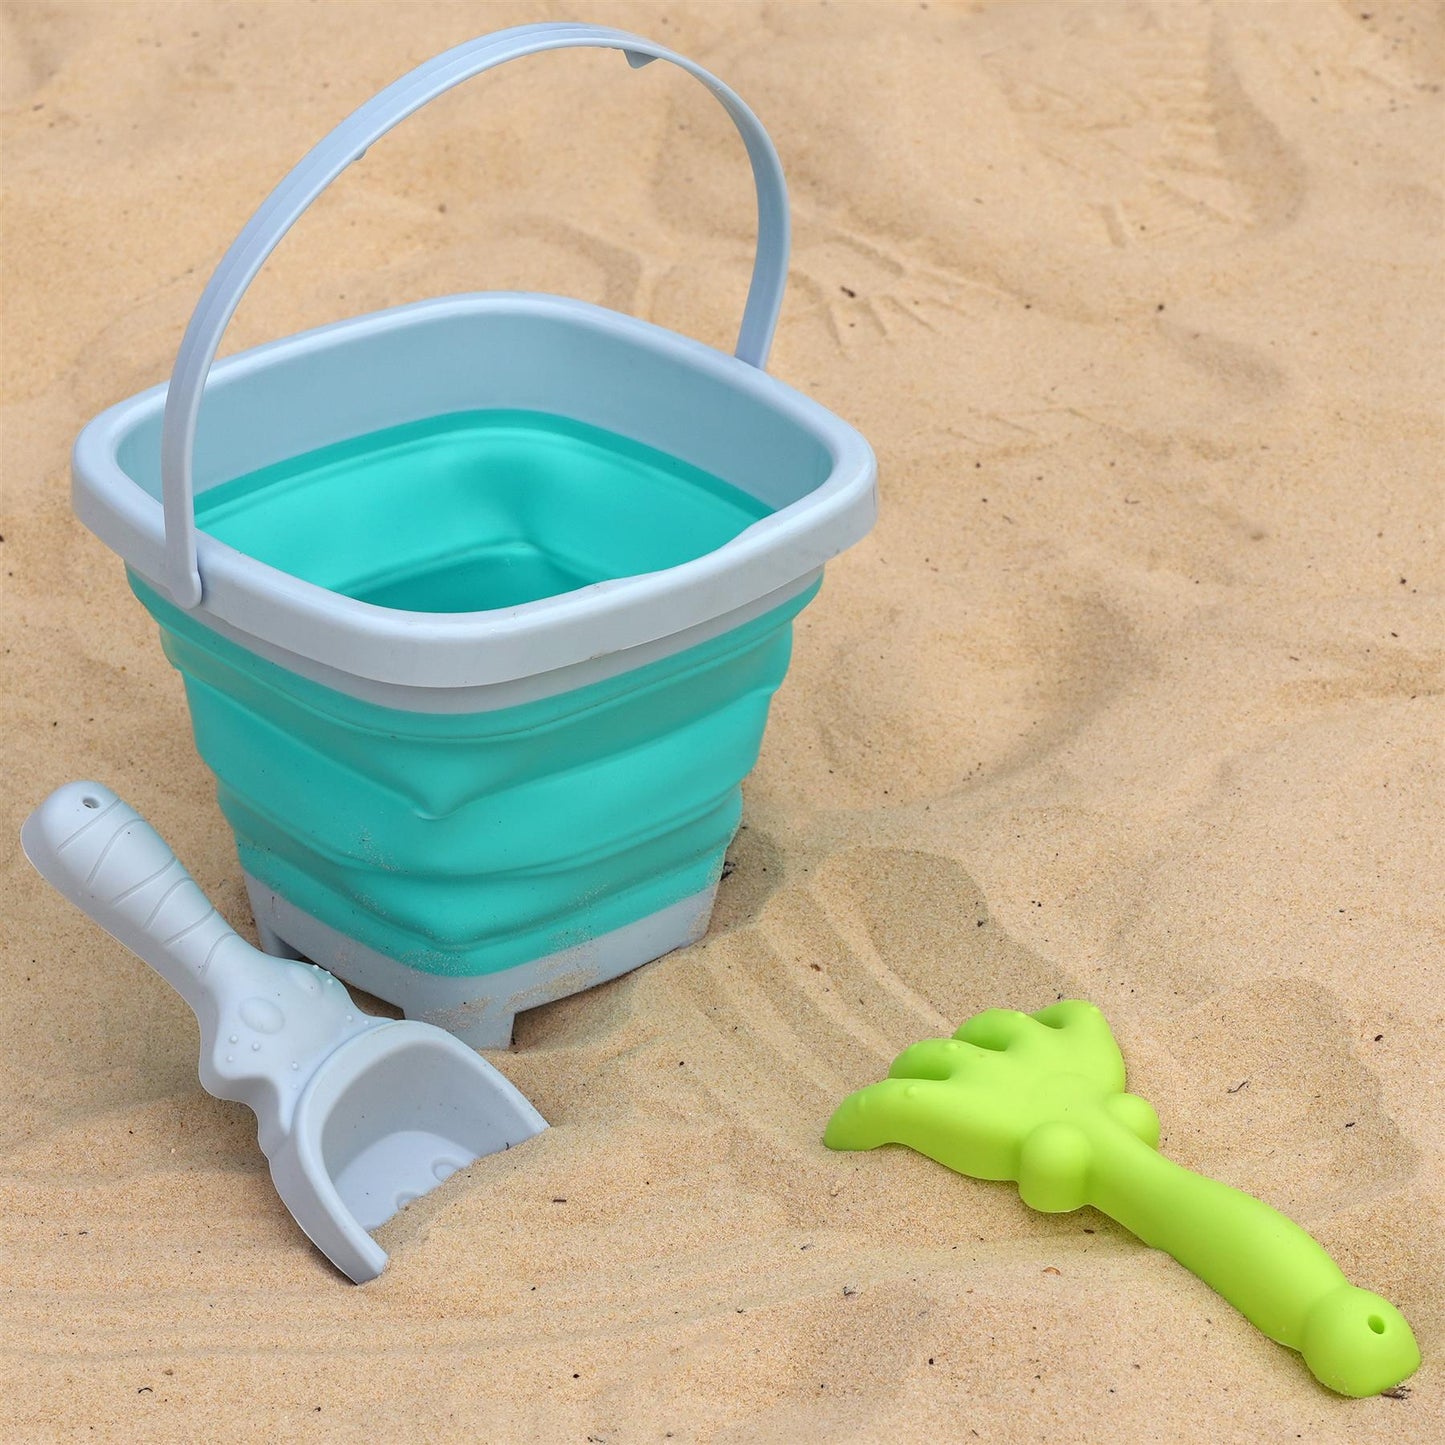 Beach Playset with Foldable Bucket Rake and Shovel by The Magic Toy Shop - UKBuyZone